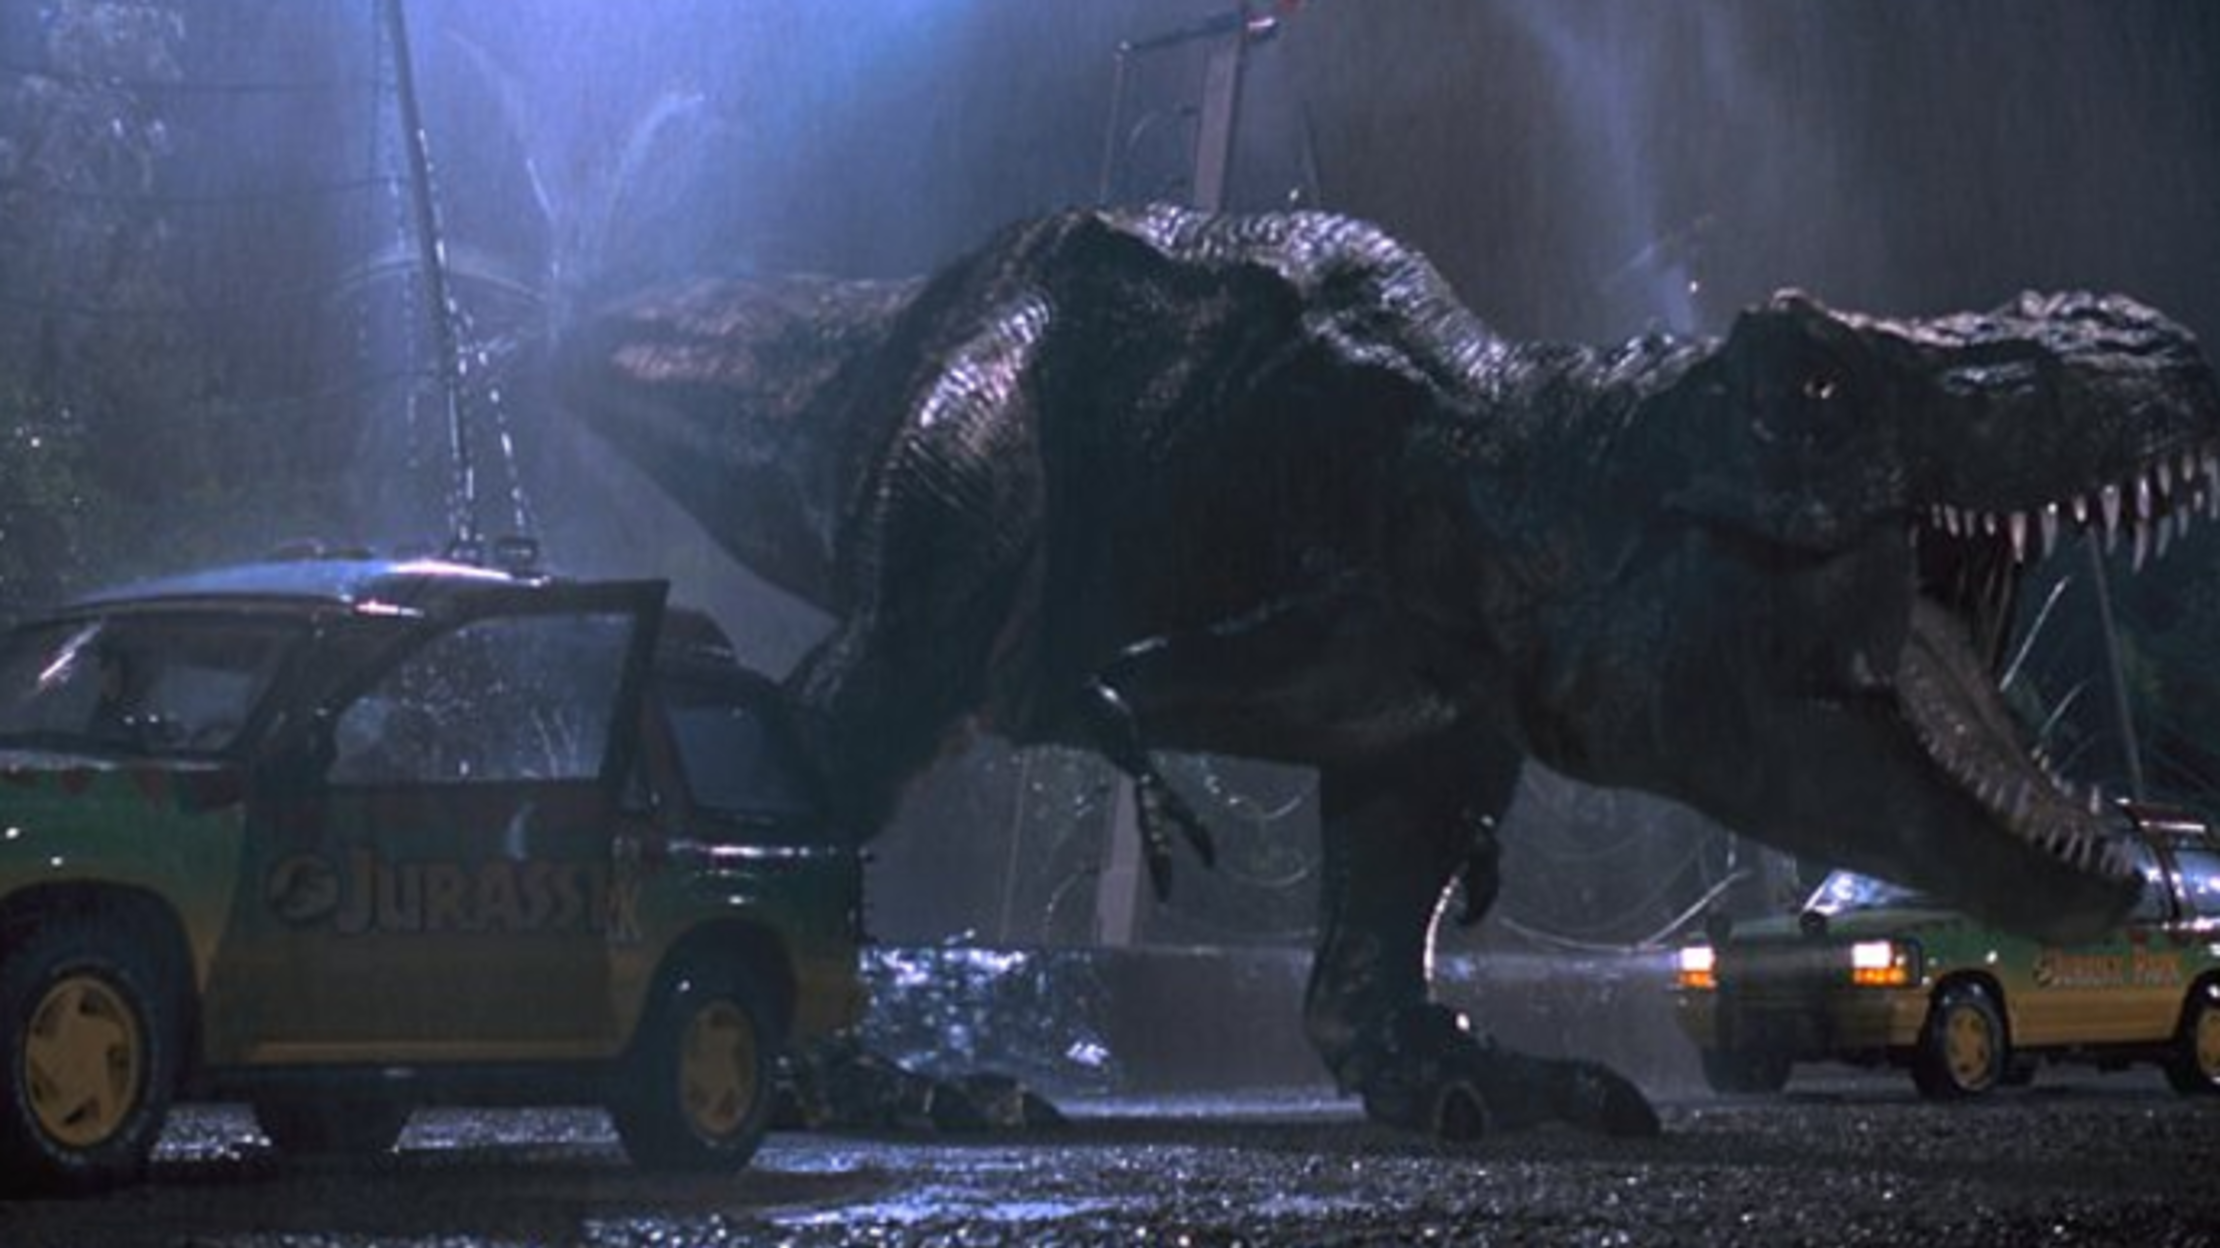 7 Jurassic Park Dinosaurs: Then and Now | Mental Floss